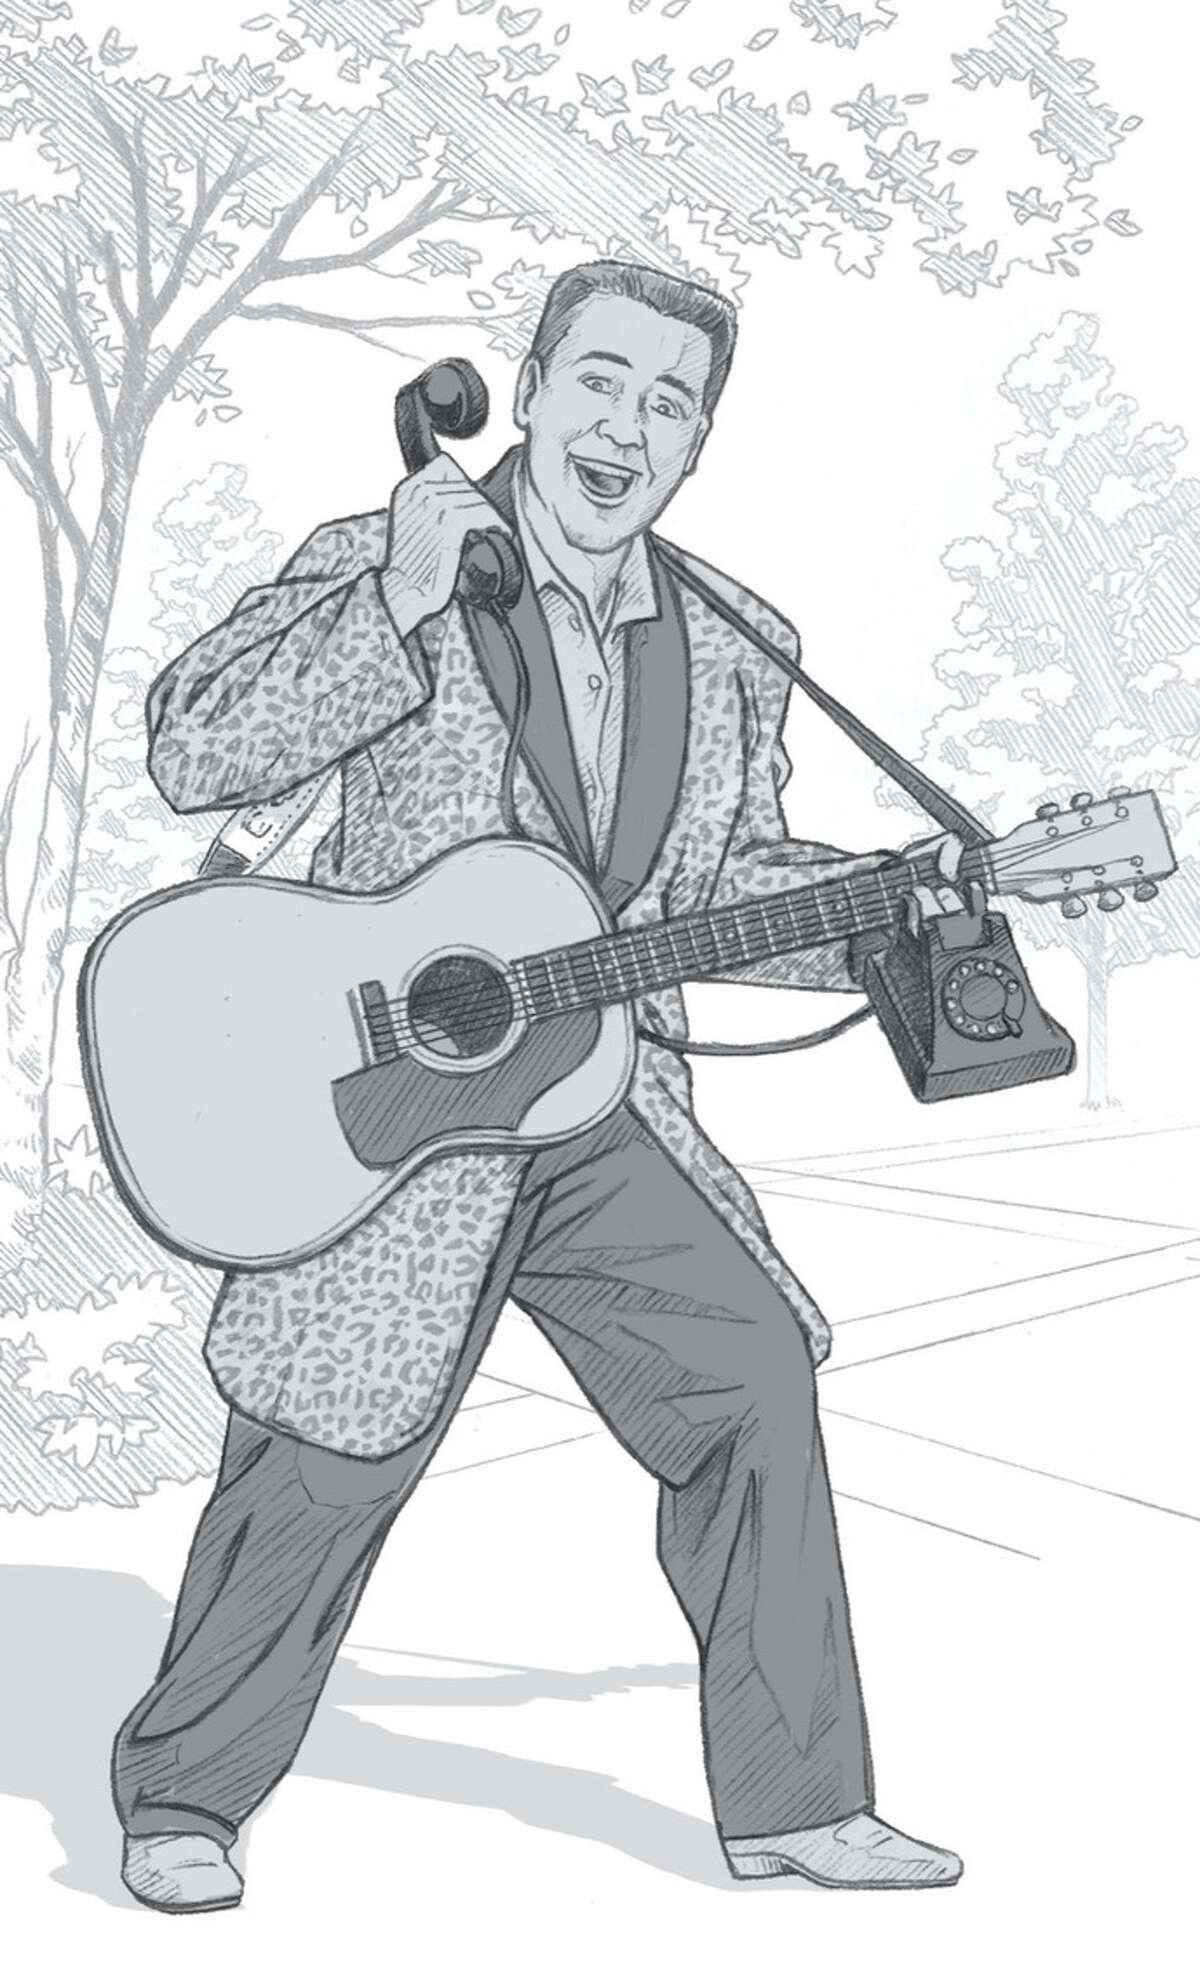 A rendering of a statue of The Big Bopper shows him holding a rotary phone, noting his hit song, "Chantilly Lace." His family is hoping to erect the bronze statue in Beaumont, Texas